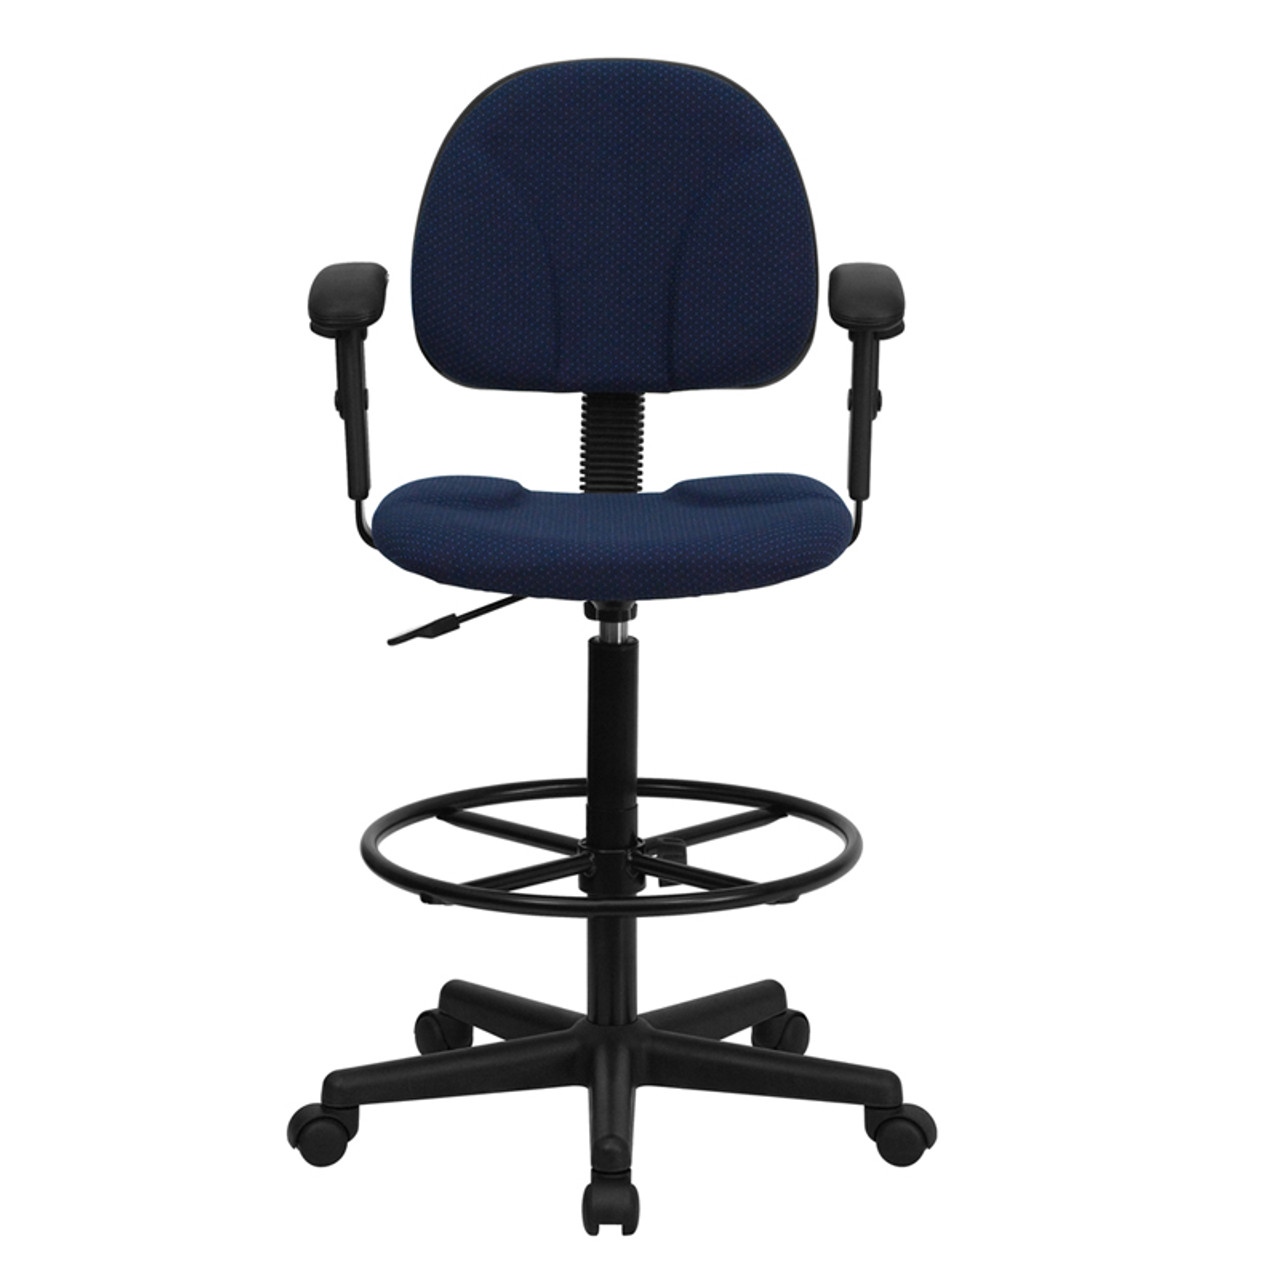 Navy Blue Patterned Fabric Ergonomic Drafting Stool with Arms (Adjustable Range 26''-30.5''H or 22.5''-27''H) , #FF-0513-14